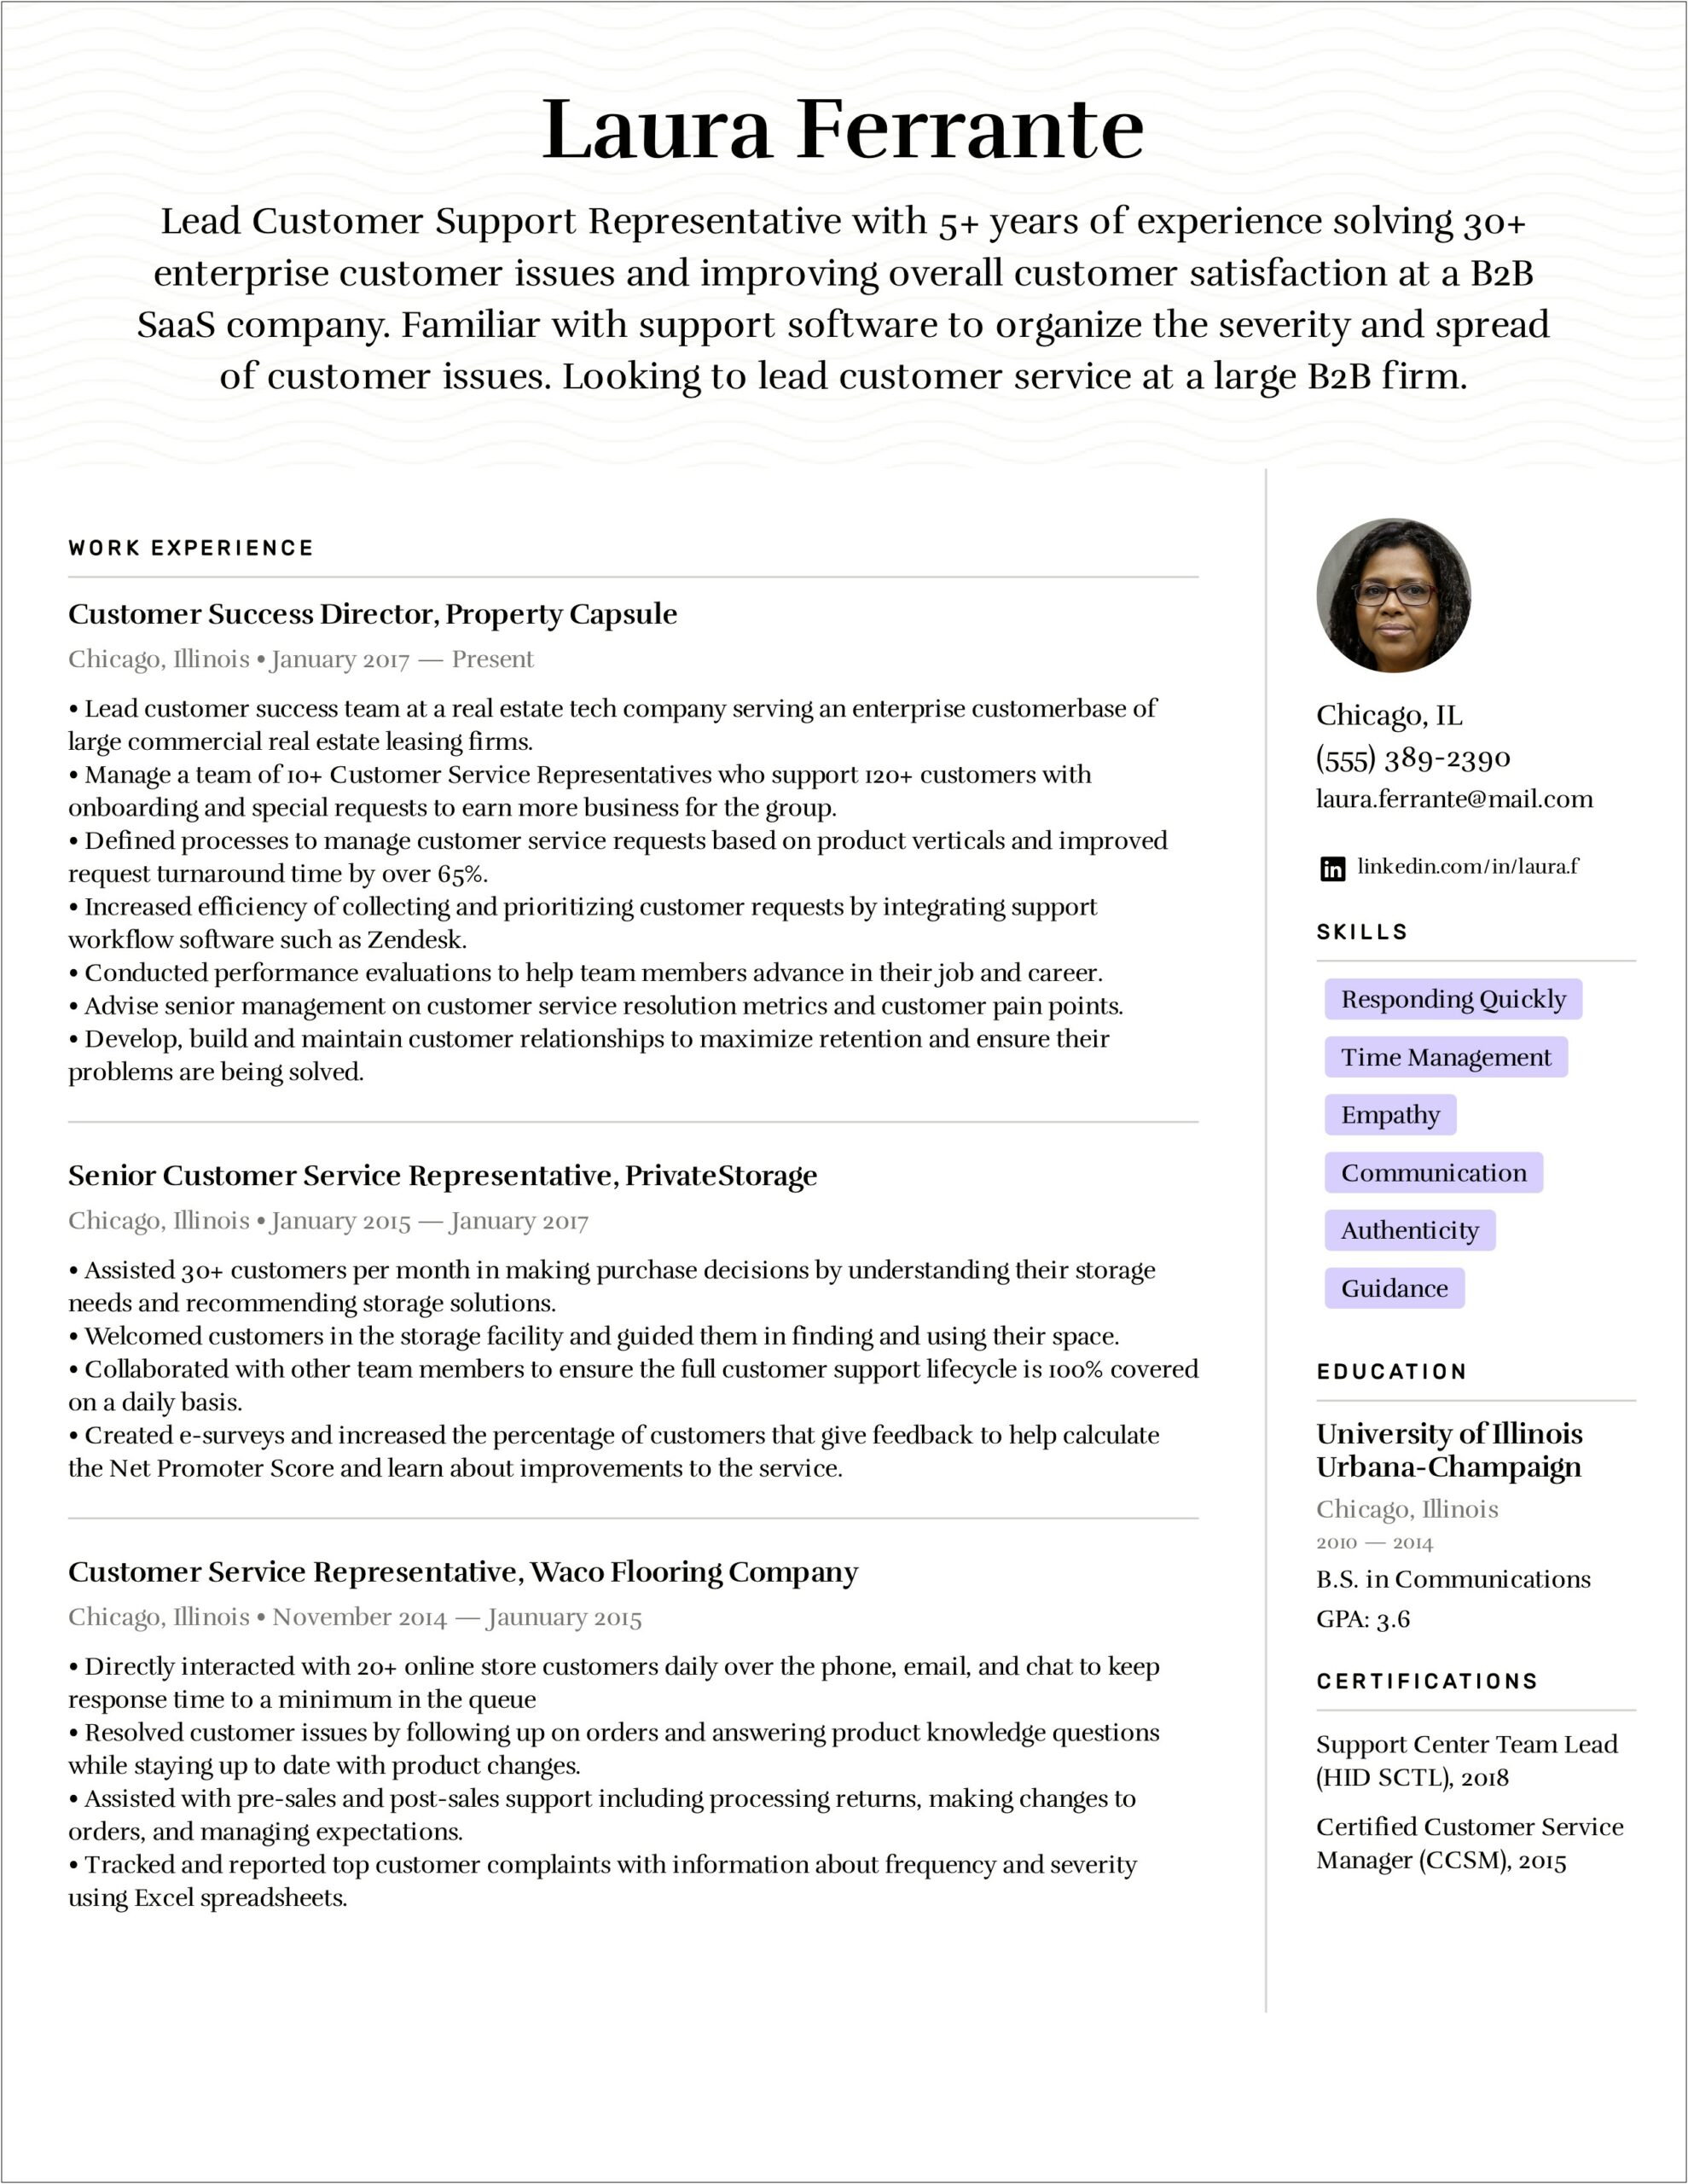 Objective Statement For A Resume For Customer Service